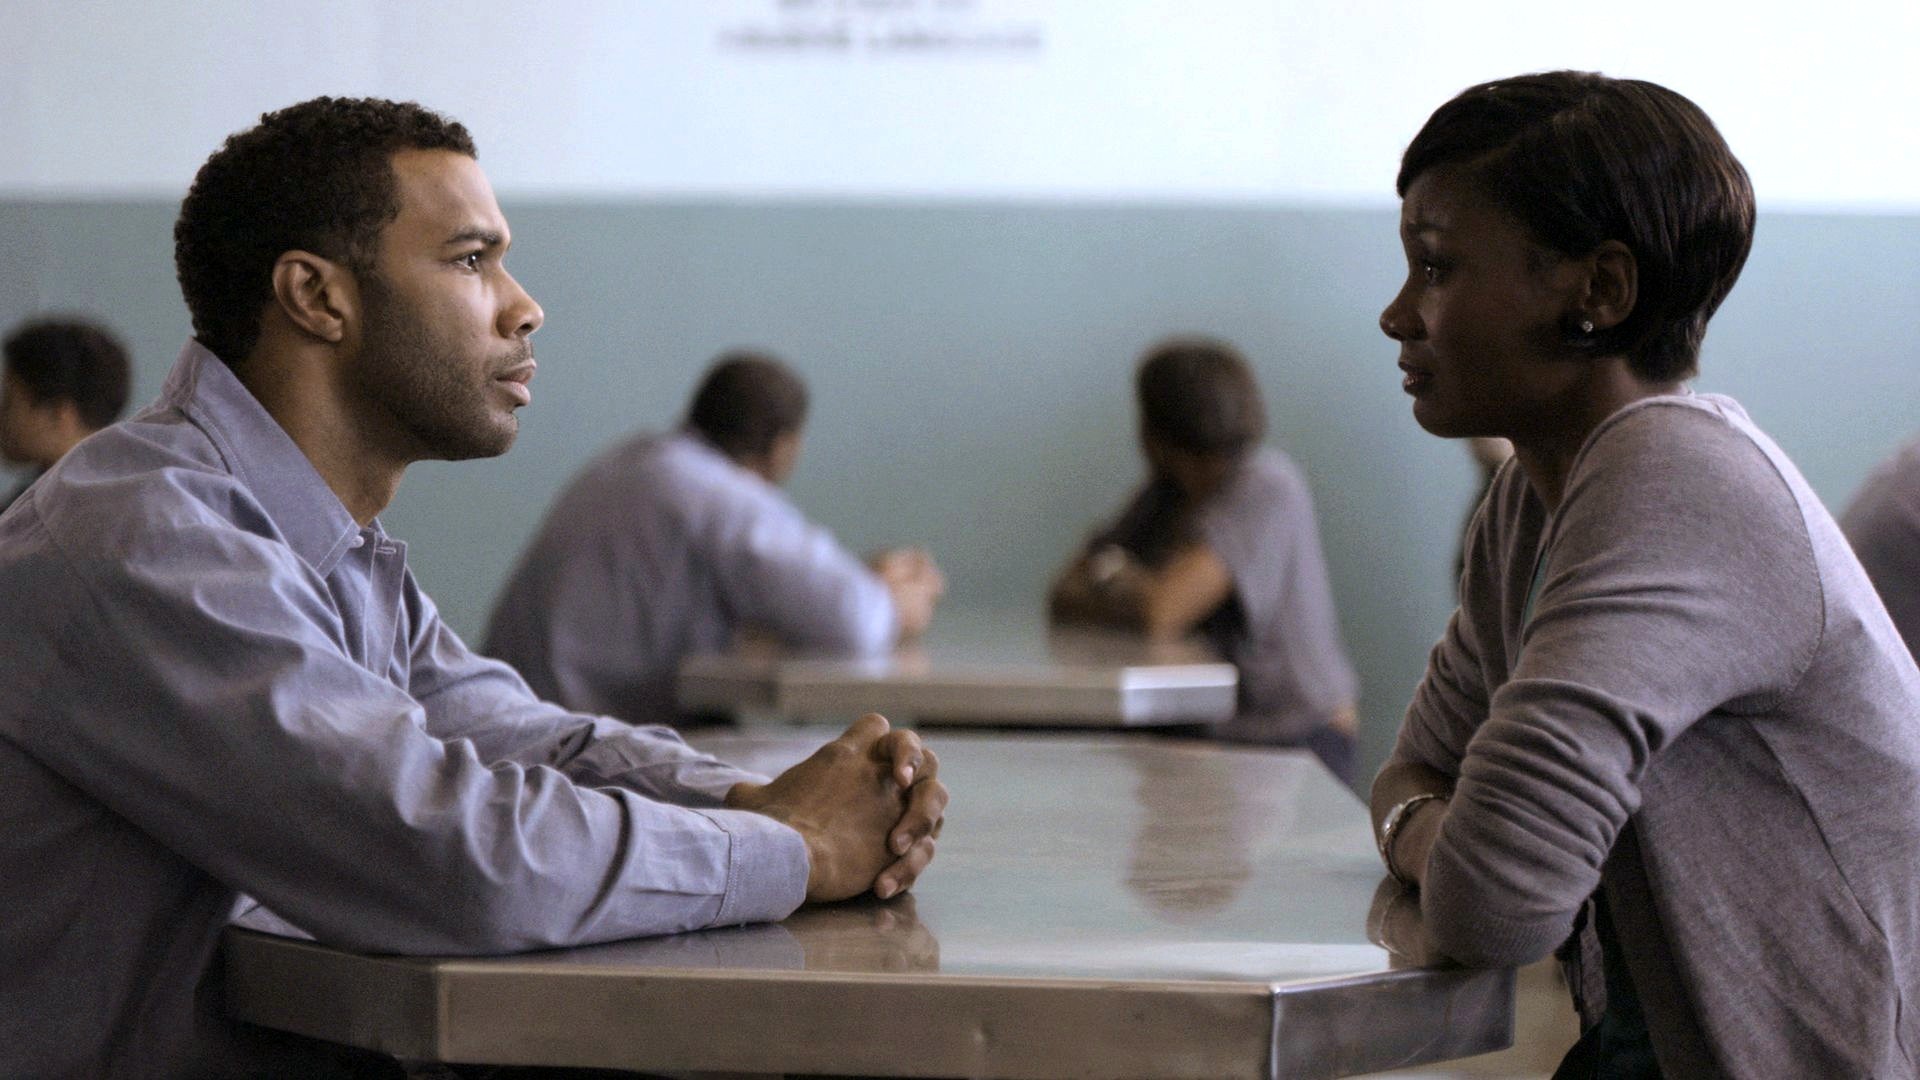 Omari Hardwick stars as Derek and Emayatzy Corinealdi stars as Ruby in Participant Media's Middle of Nowhere (2012)